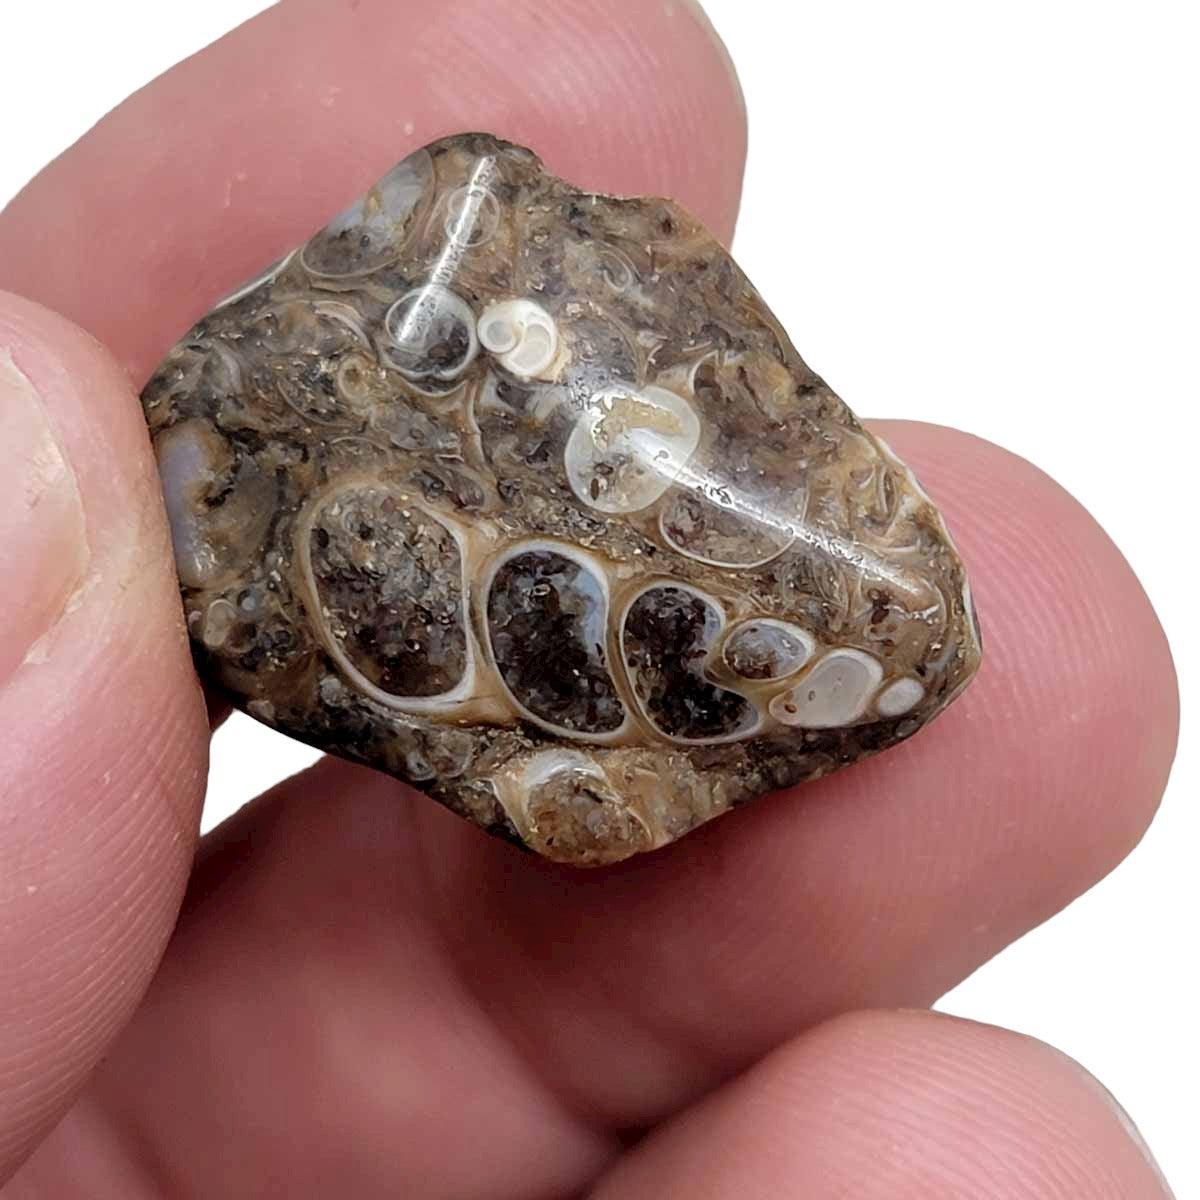 Fossil Turritella Agate Tumbled Polished Pocket Stones! 200 grams! - LapidaryCentral